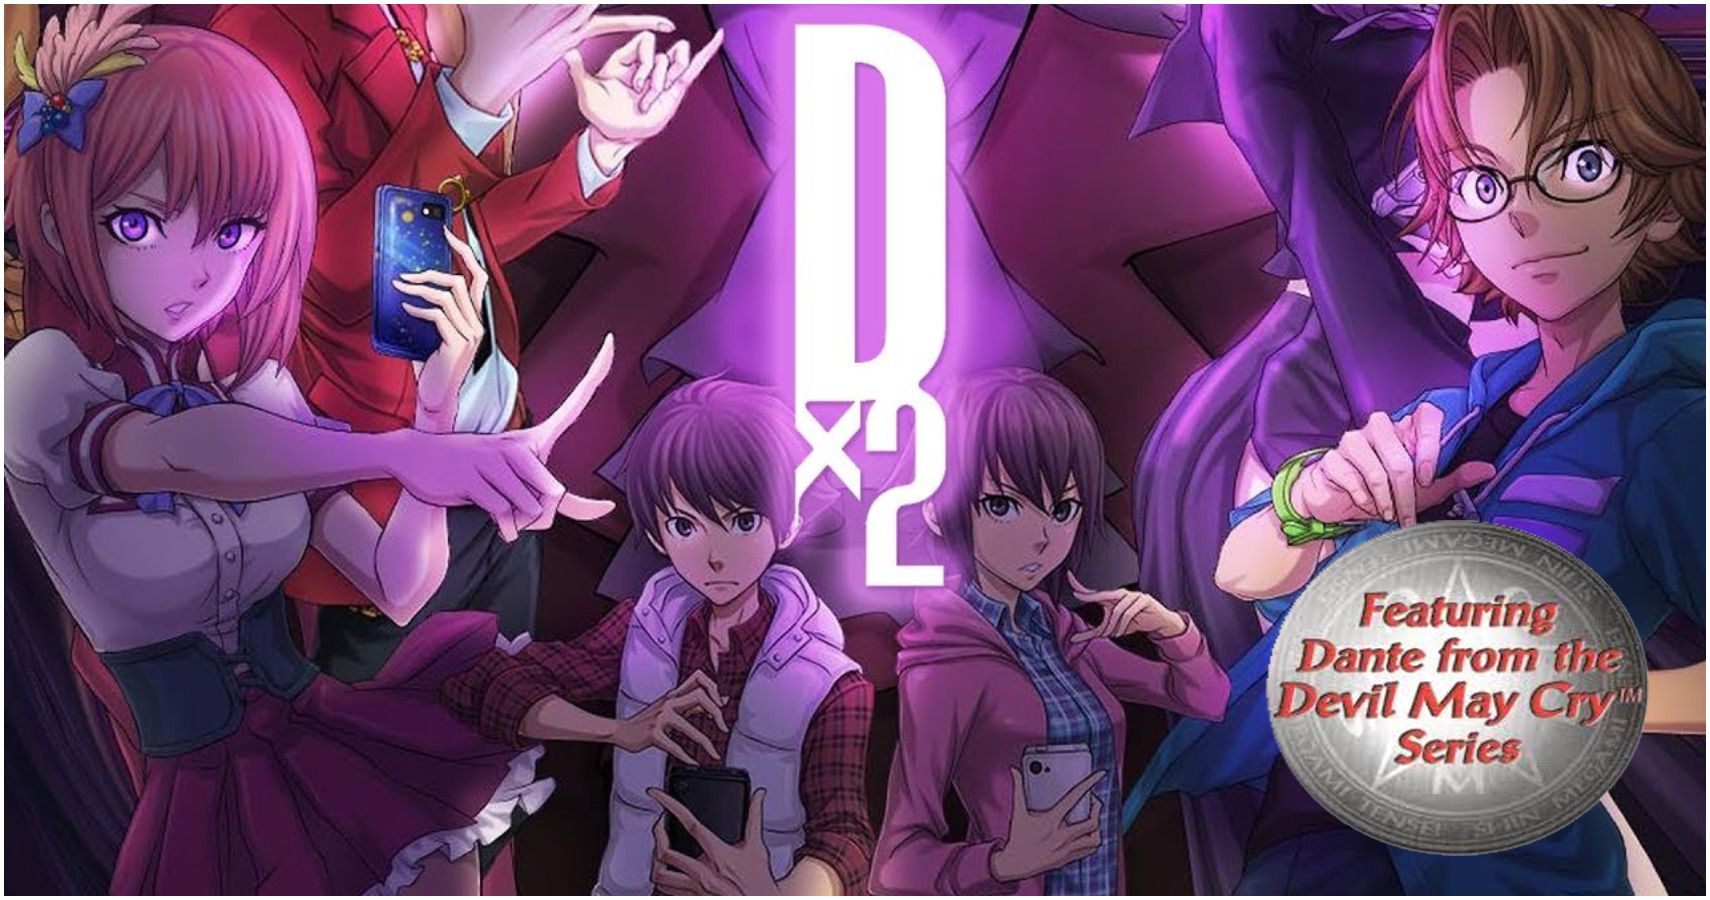 Shin Megami Tensei Liberation Dx2 Will Soon Feature Dante From Devil May Cry